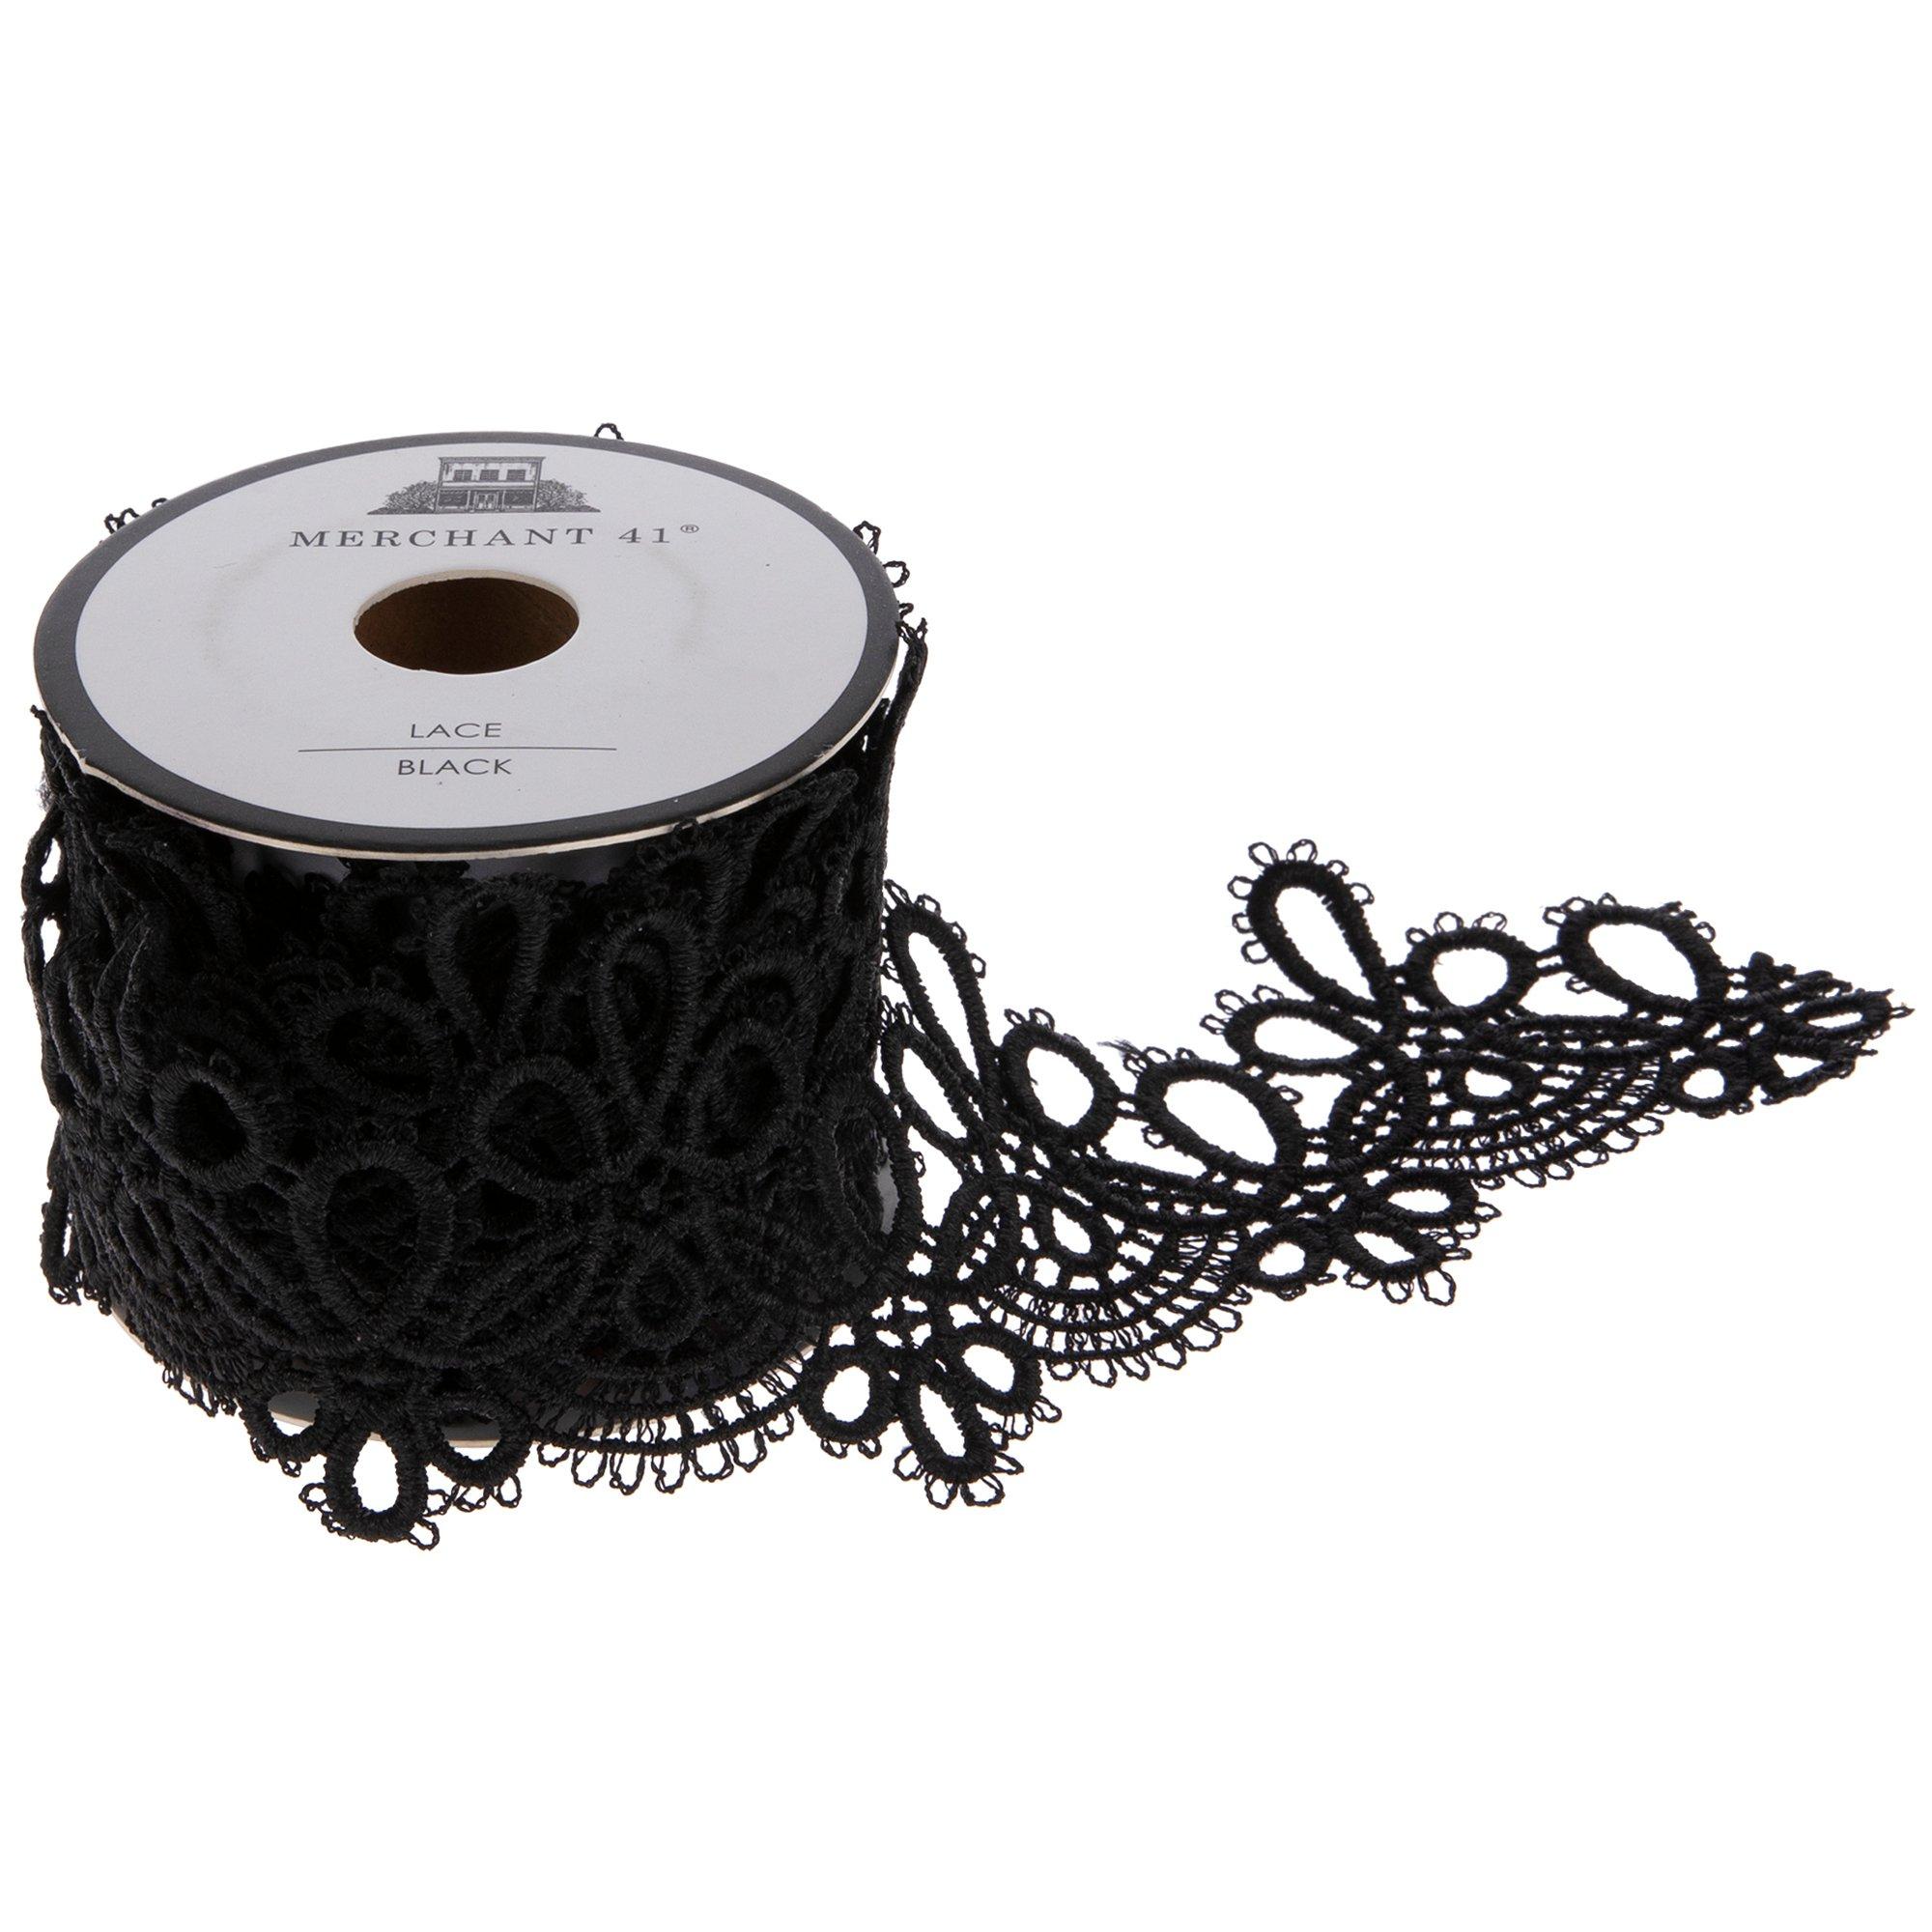 Black Embroidered Lace Ribbon  Embroidered Lace Trim Black